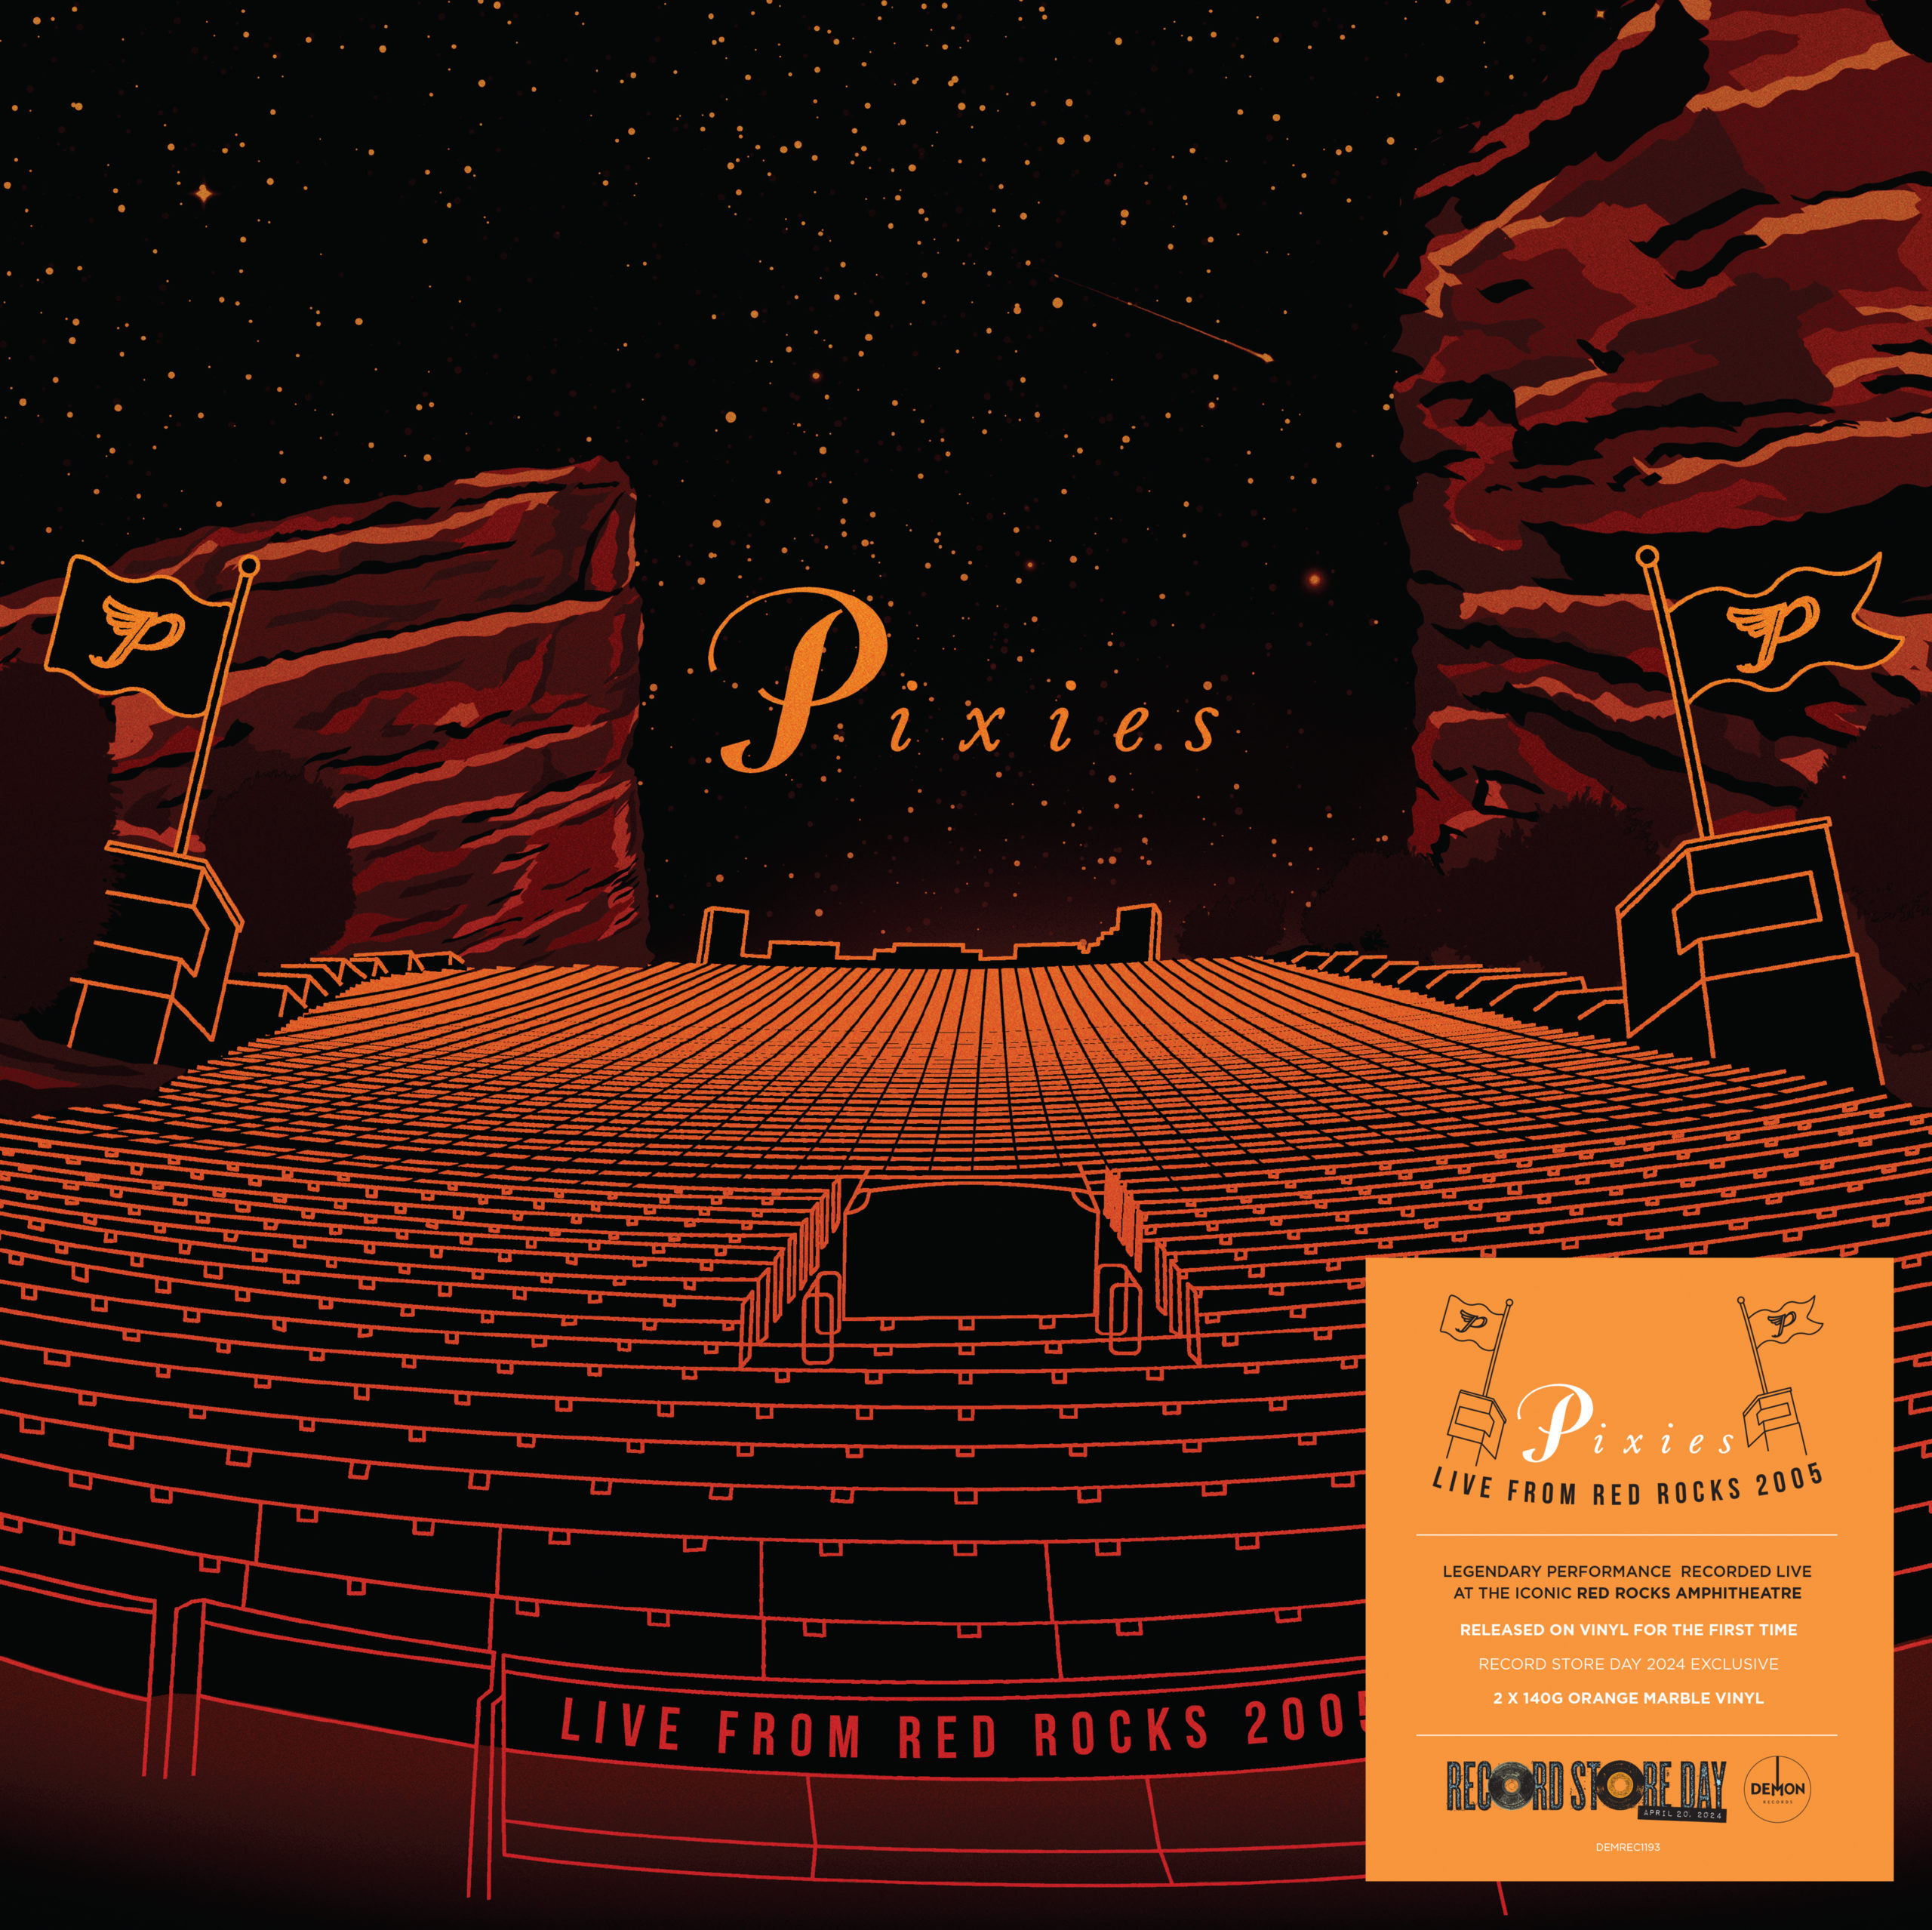 PIXIES - LIVE FROM RED ROCKS 2005 - LP